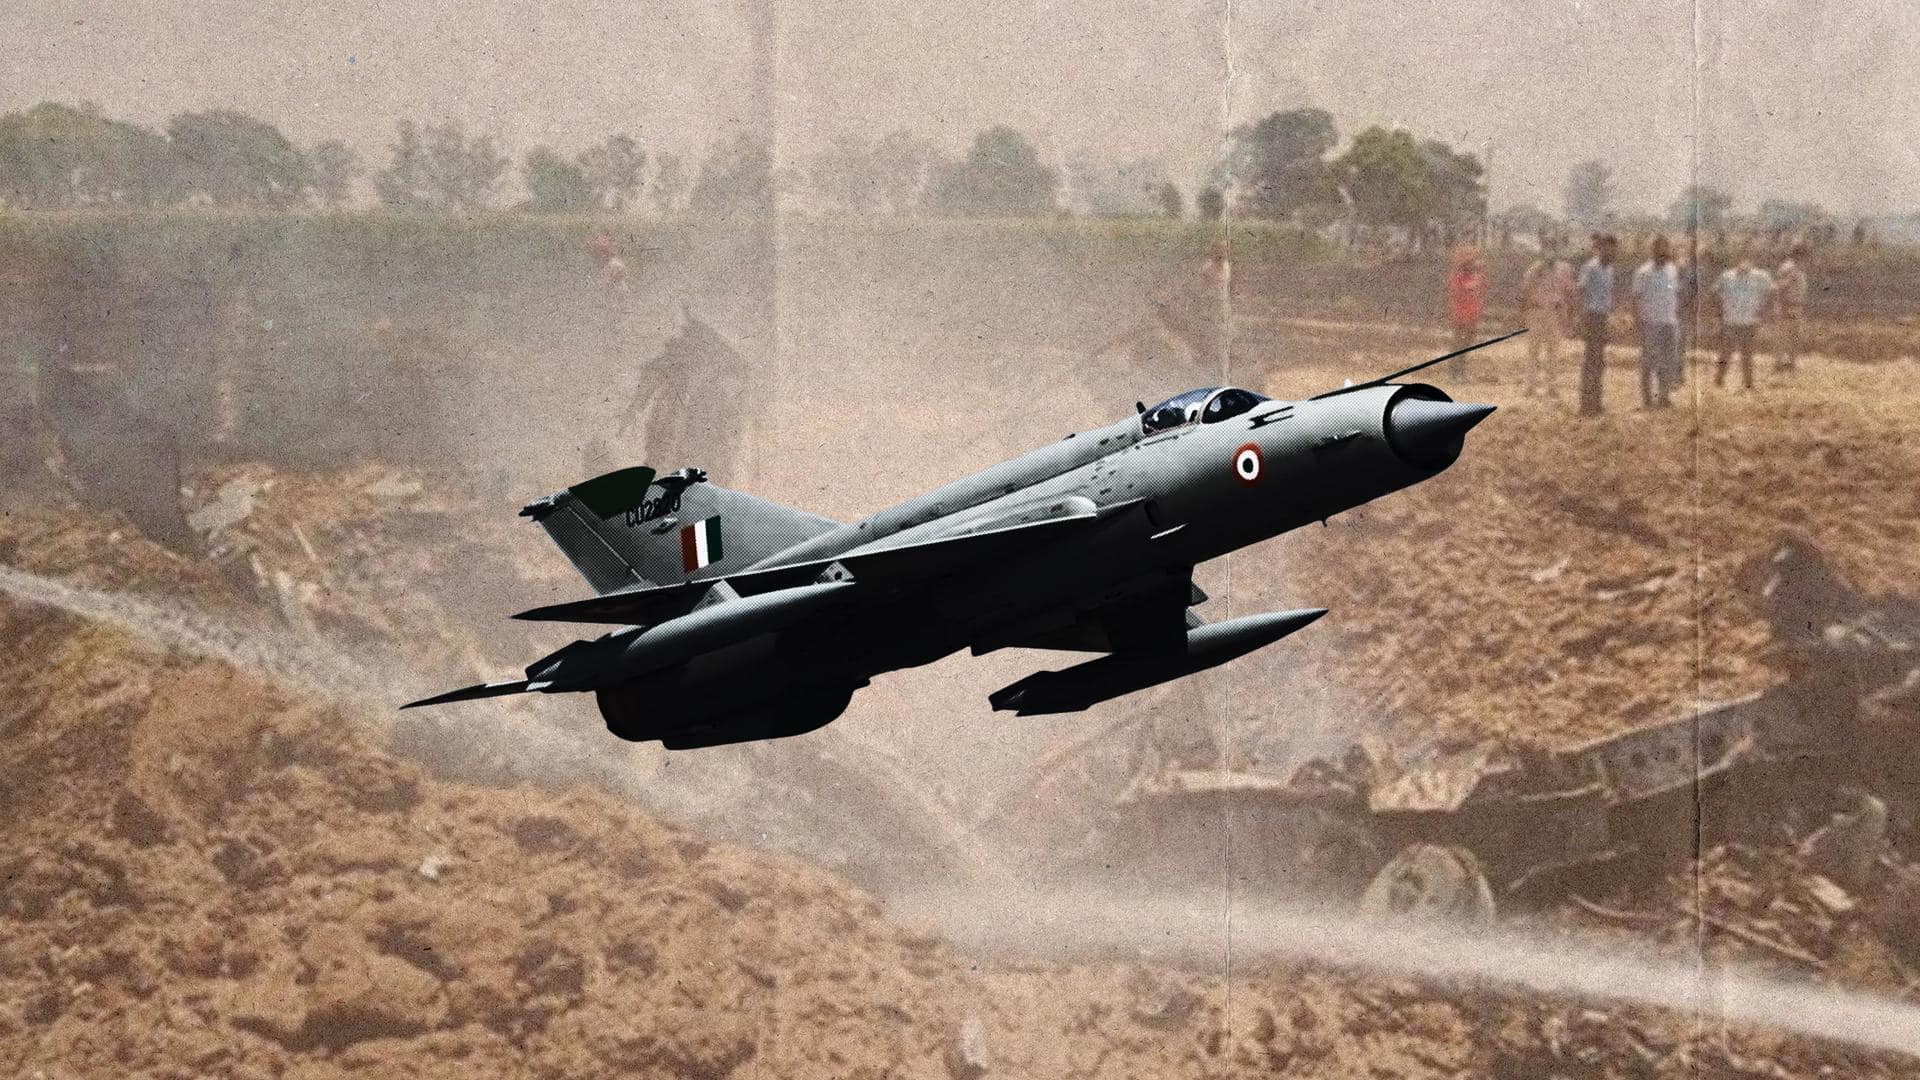 Rajasthan: 3 civilians dead as MiG-21 jet crashes on house